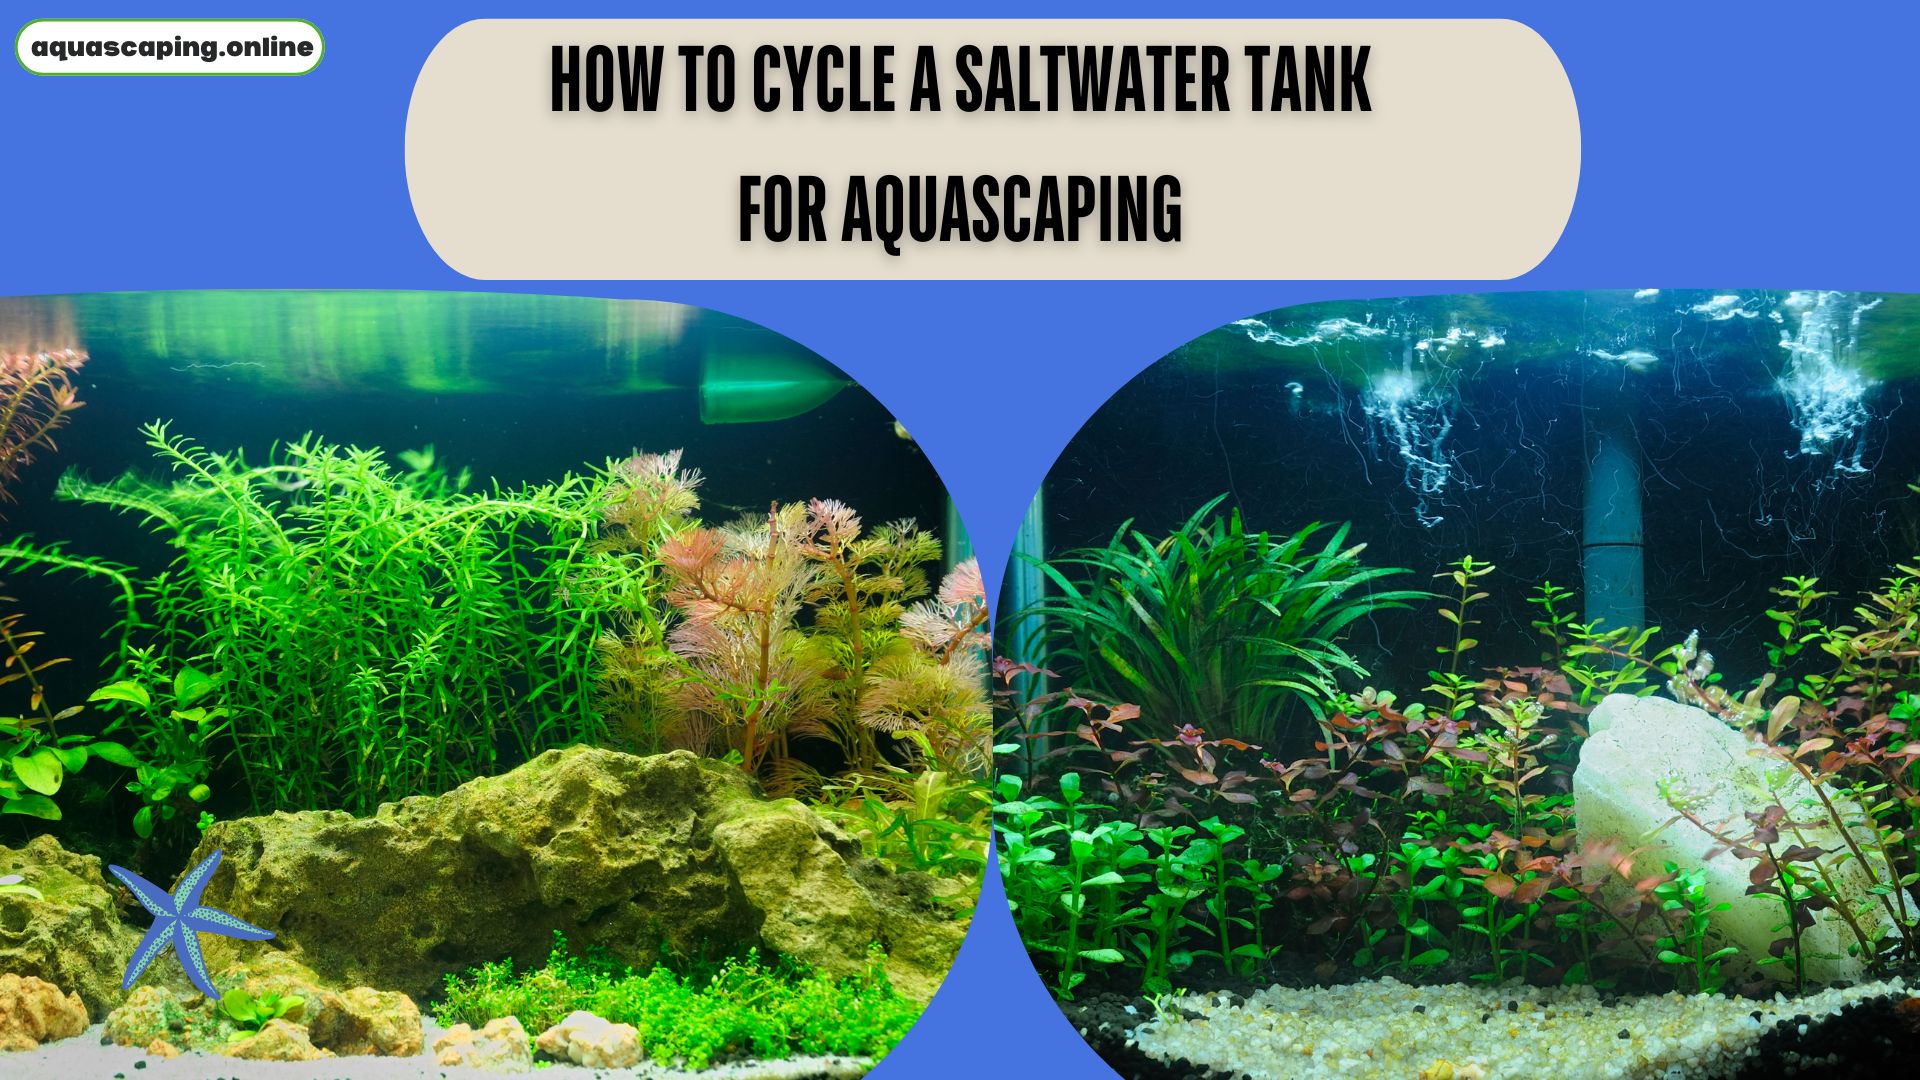 Cycle a saltwater tank for aquascaping